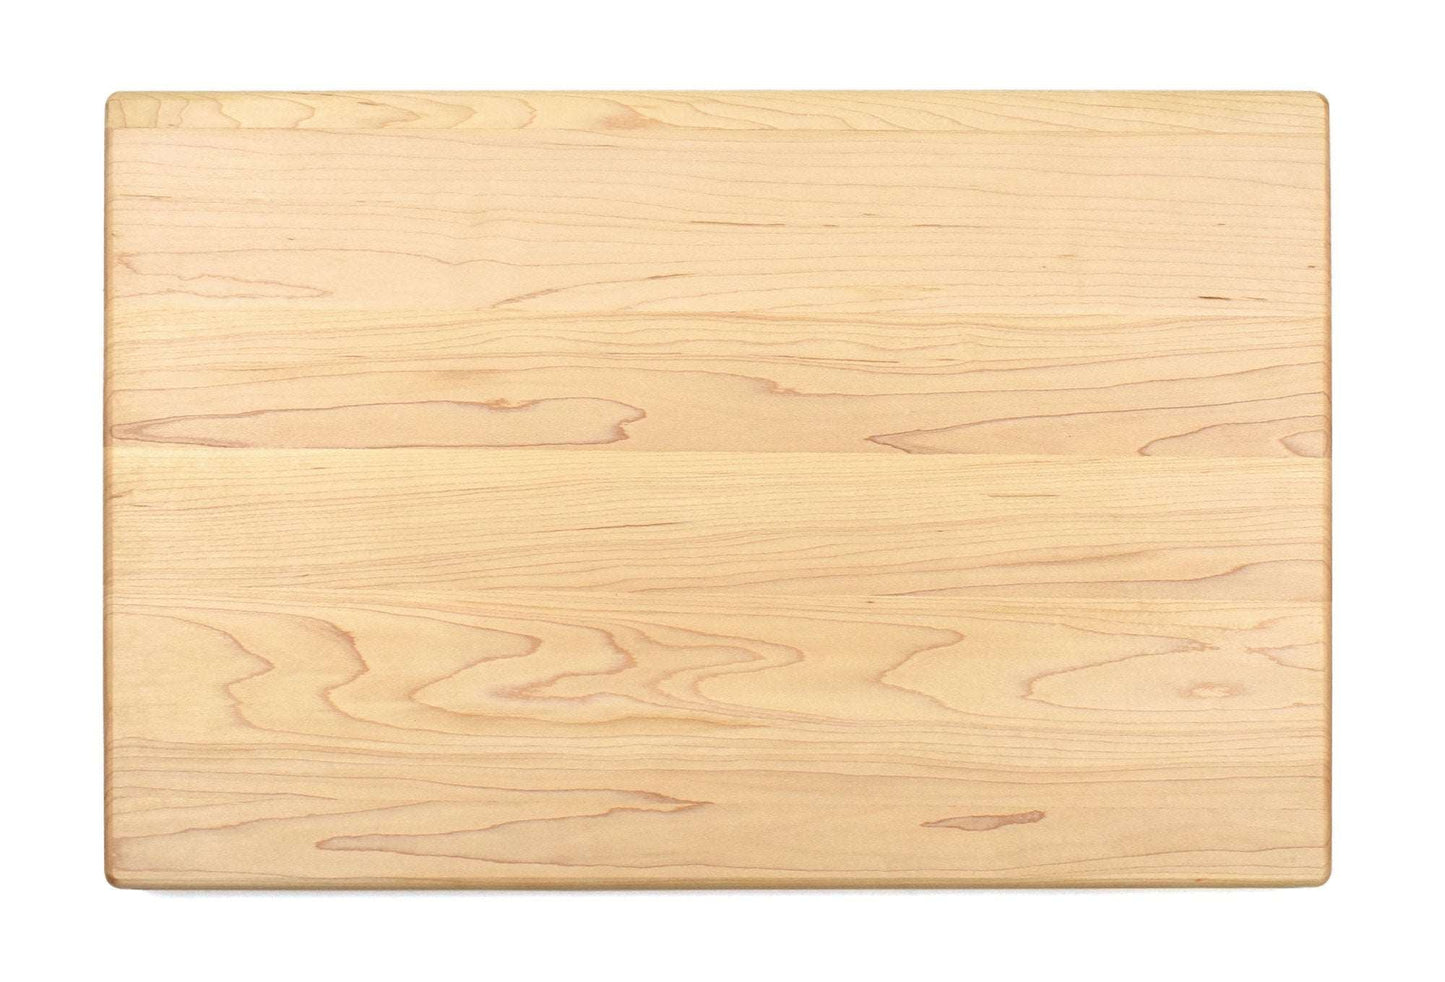 Vegetable Murder Board Cutting Board - Premium Cutting Boards from Hipster Lasers - Just $40! Shop now at Hipster Lasers